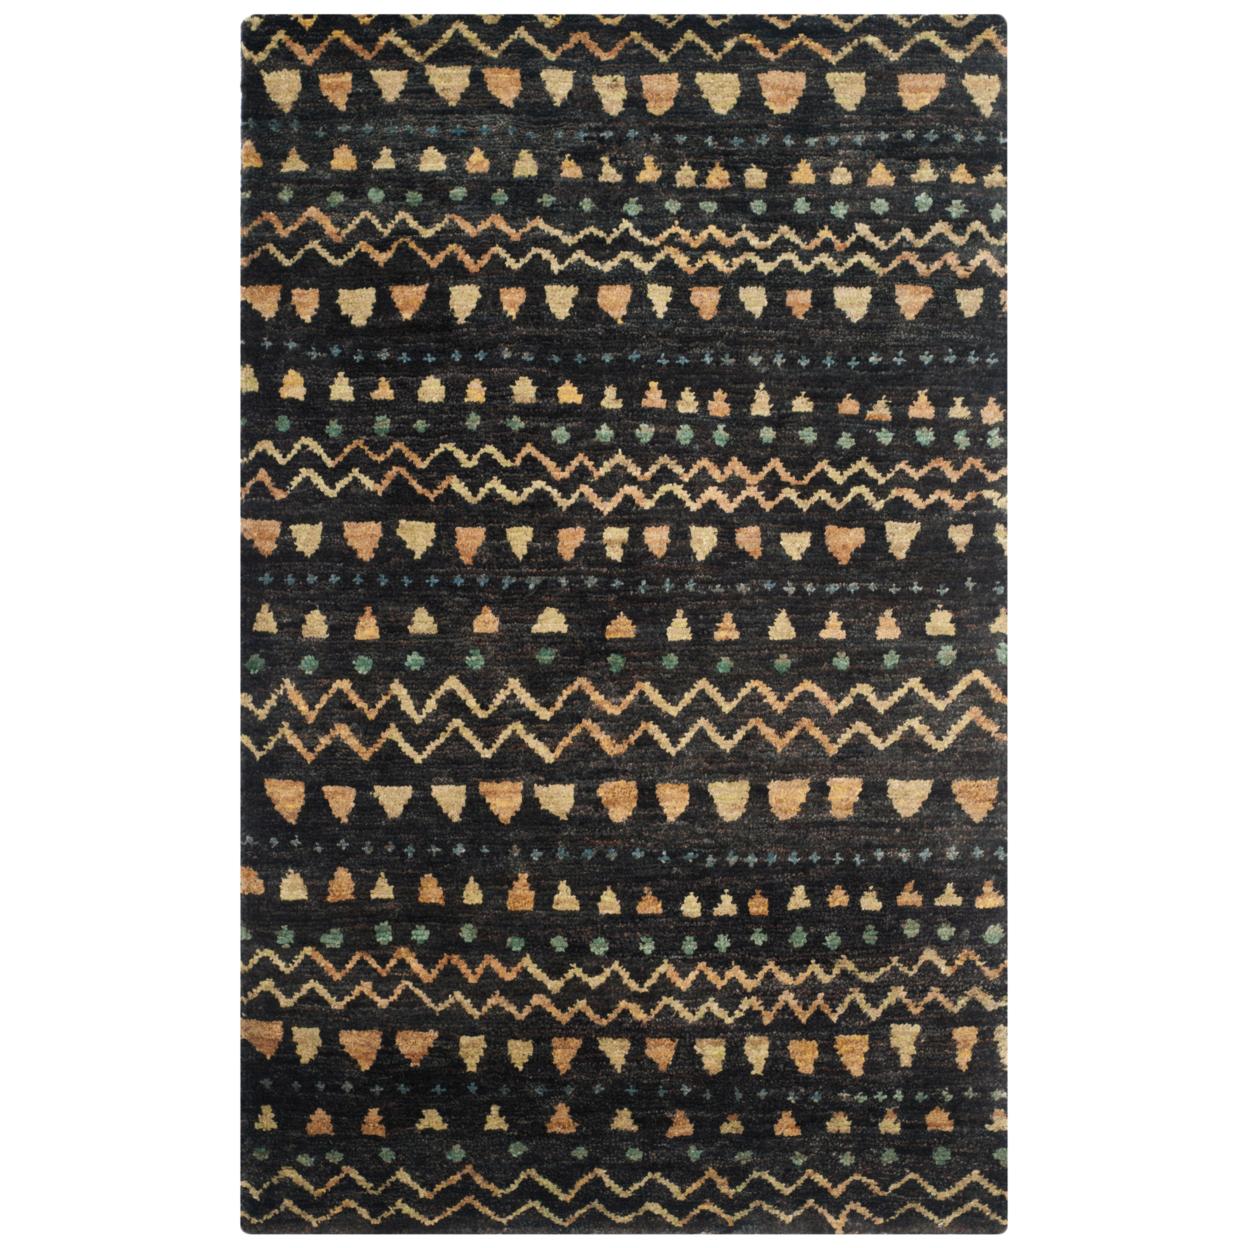 SAFAVIEH Bohemian BOH653A Hand-knotted Black / Gold Rug - 5' X 8'